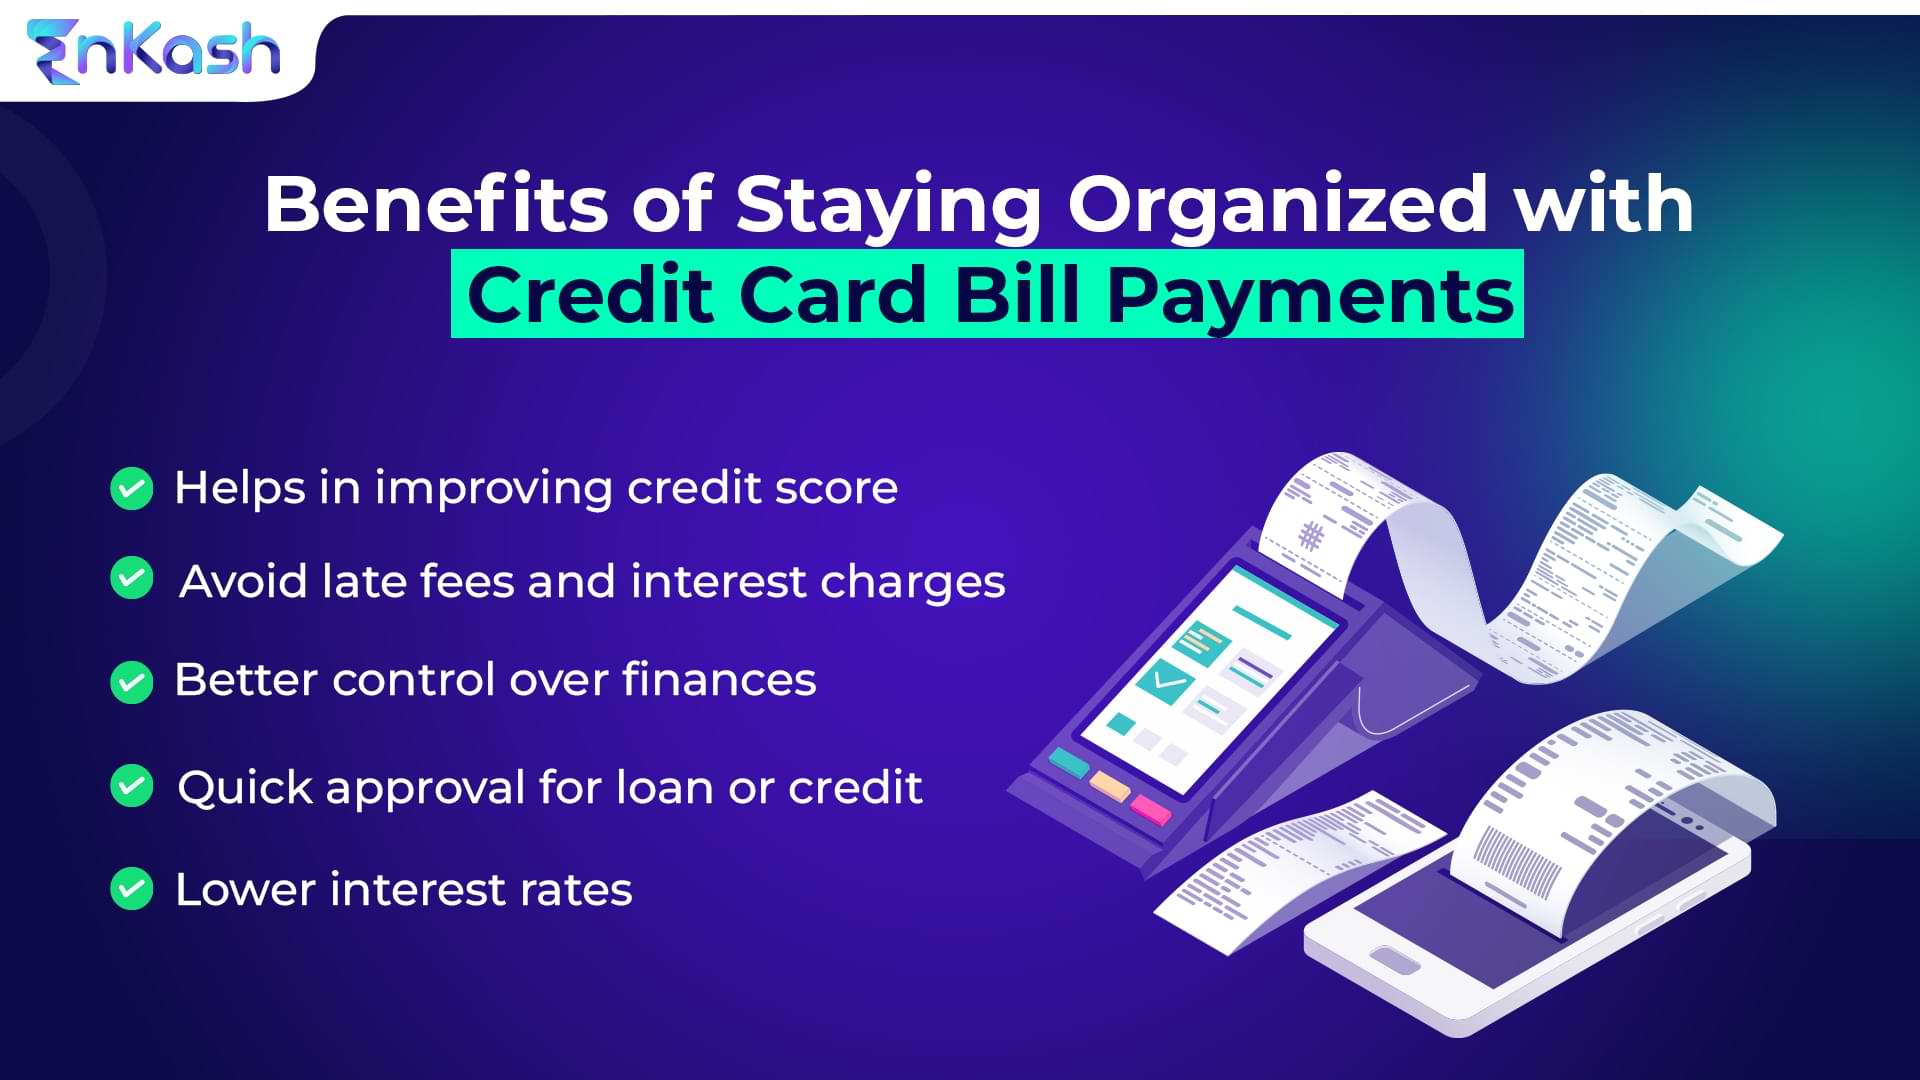 Benefits of credit card bill payment